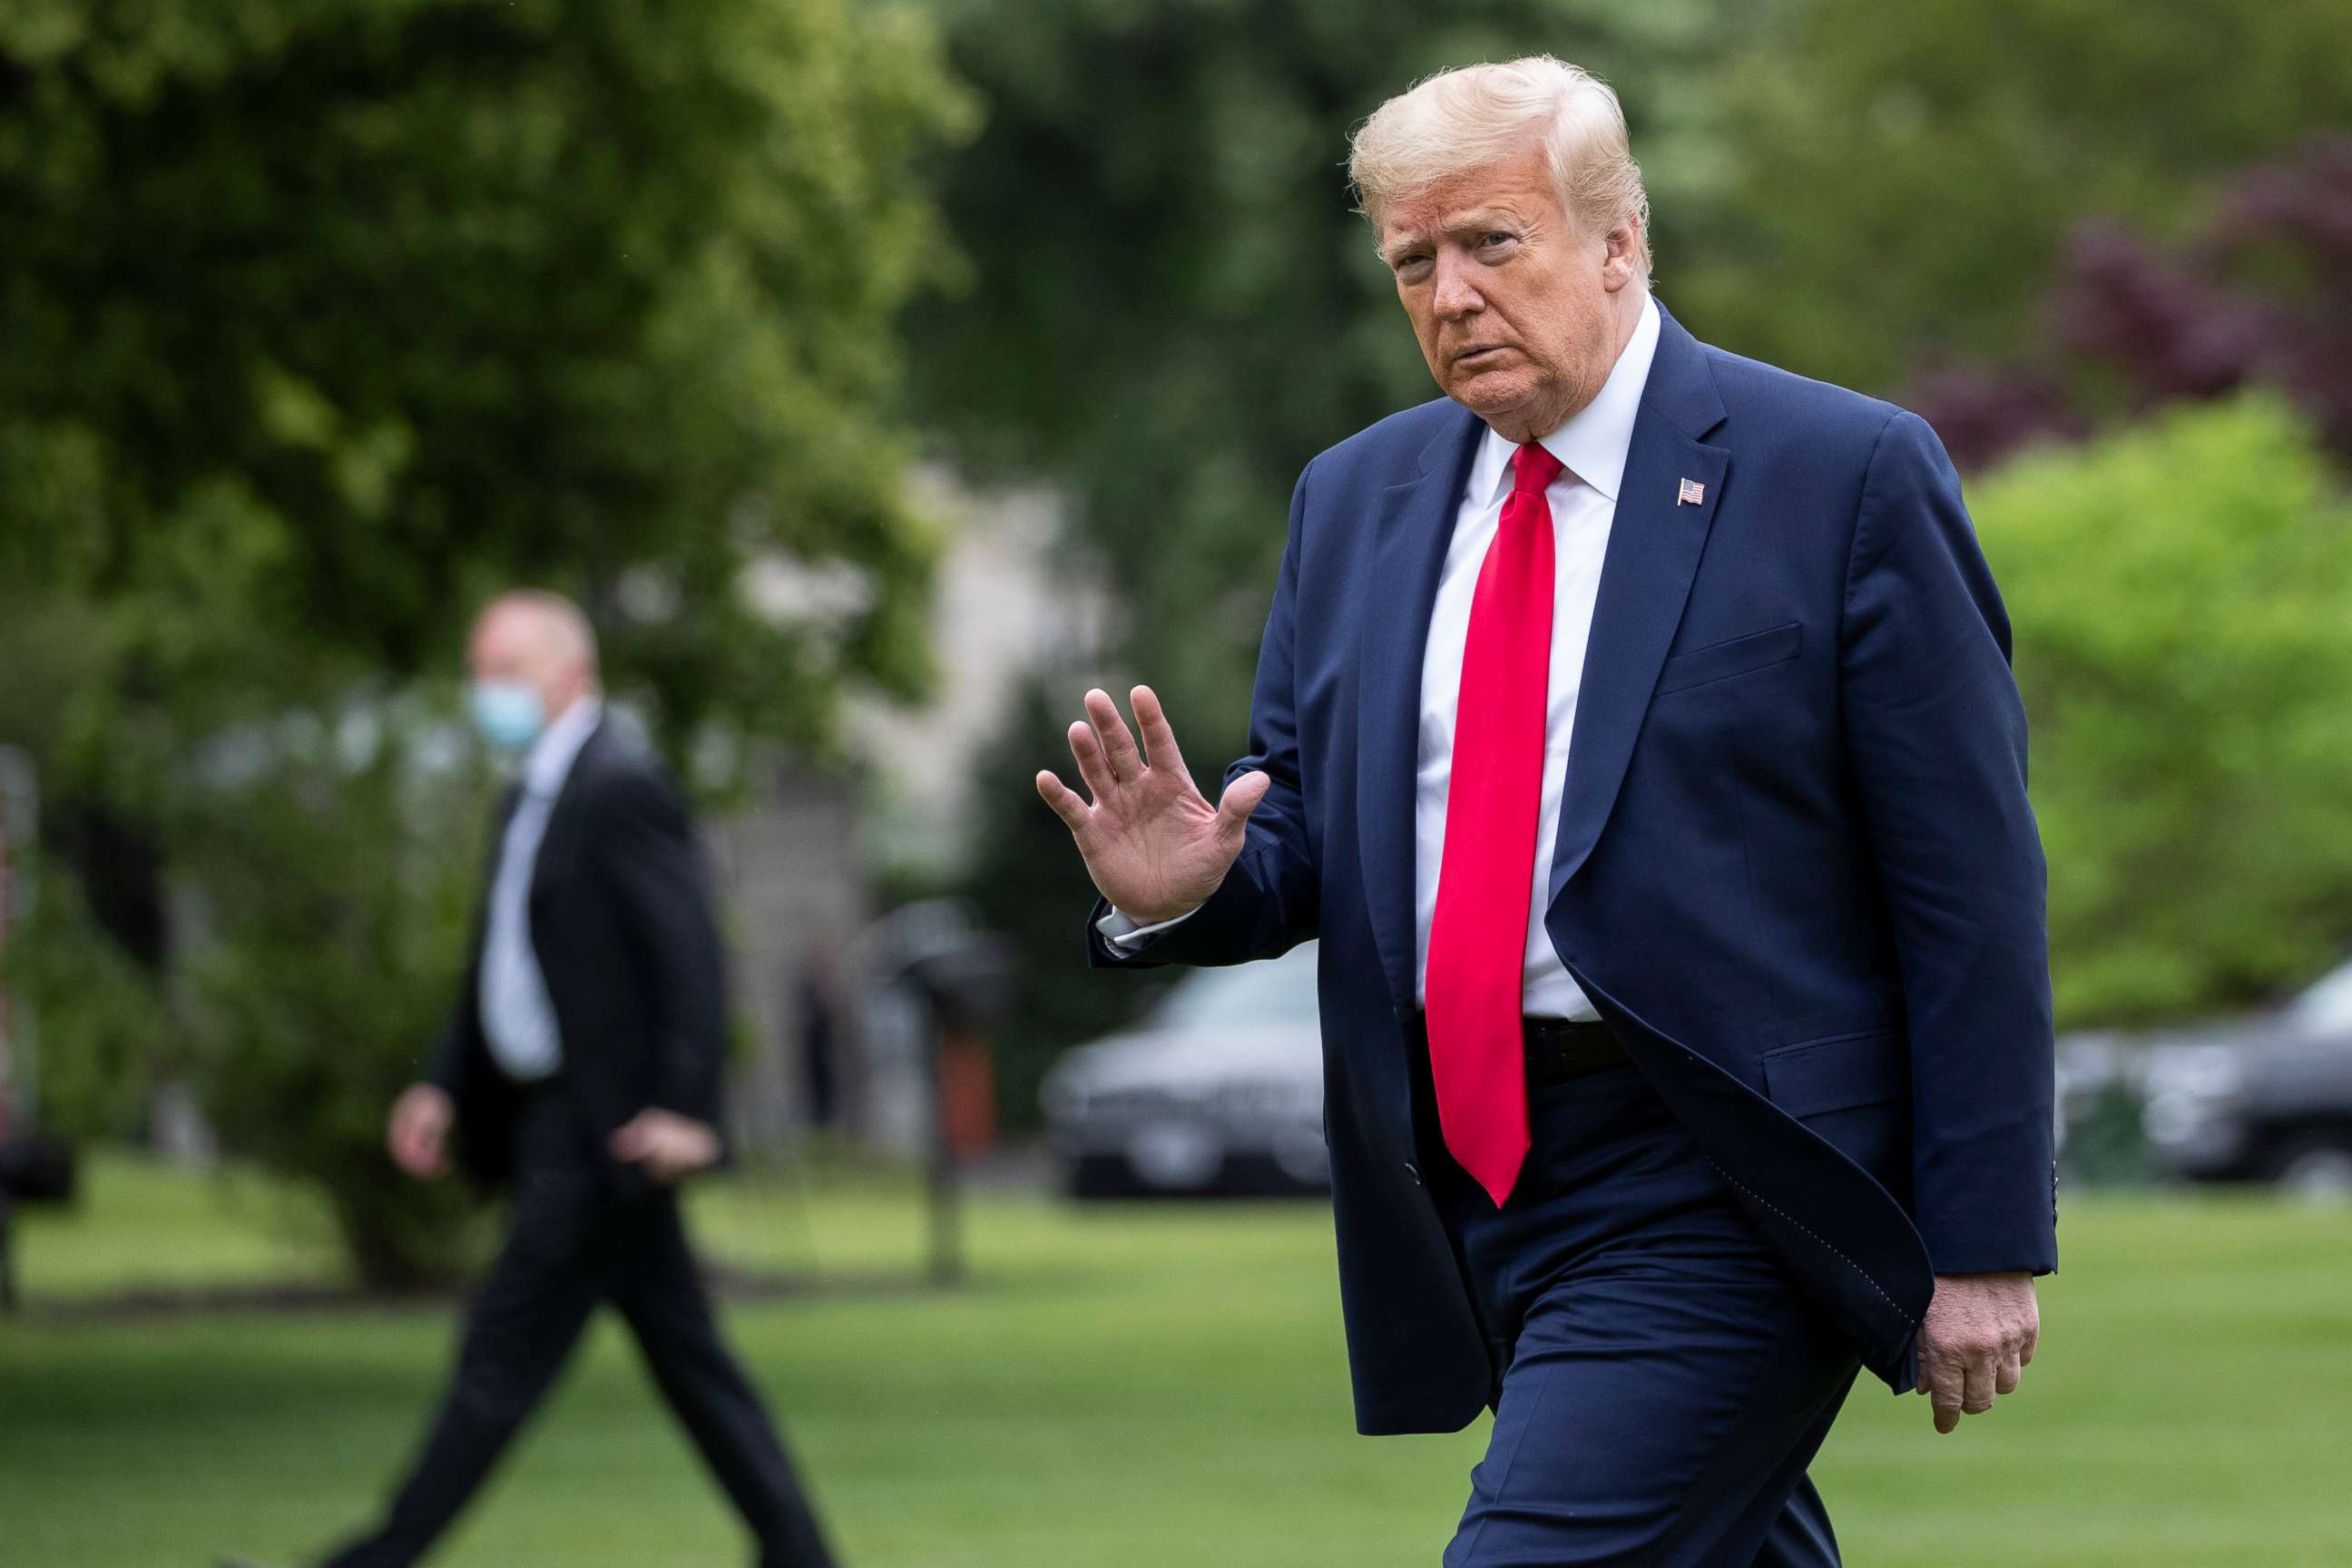 PHOTO: President Donald Trump waves as he walks across the South Lawn of the White House on Marine One, Sunday, May 17, 2020, in Washington. Trump was returning from nearby Camp David, Md.